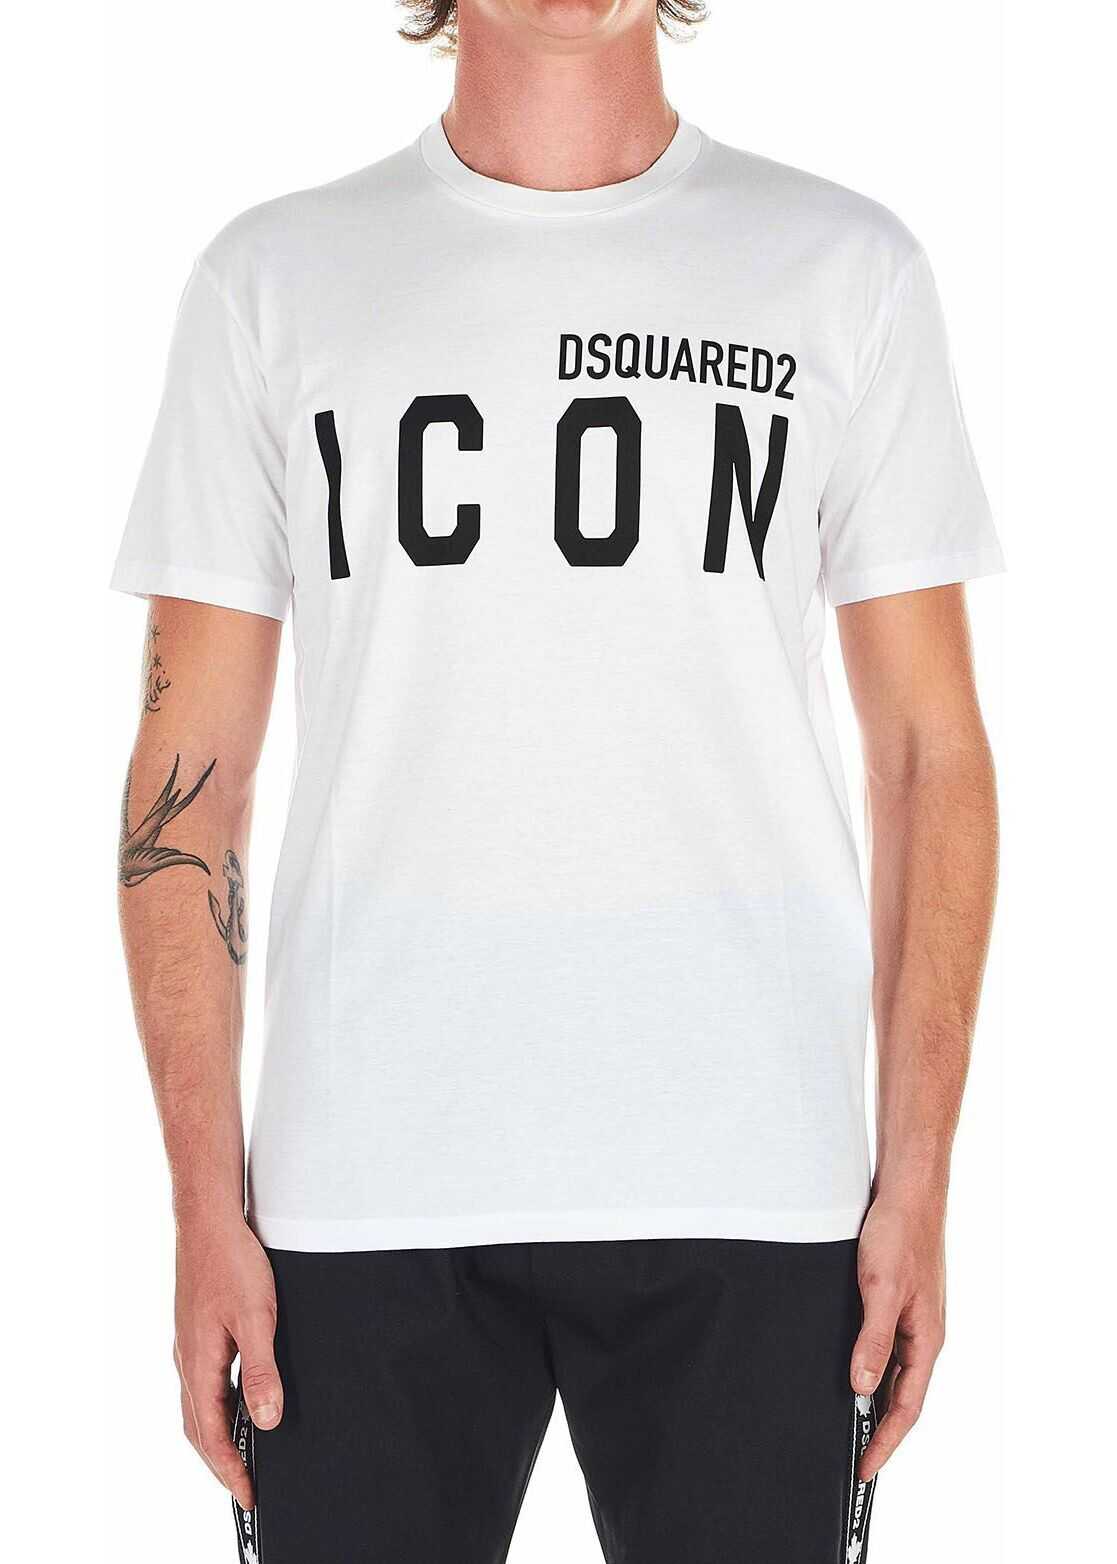 DSQUARED2 T-shirt with logo type White